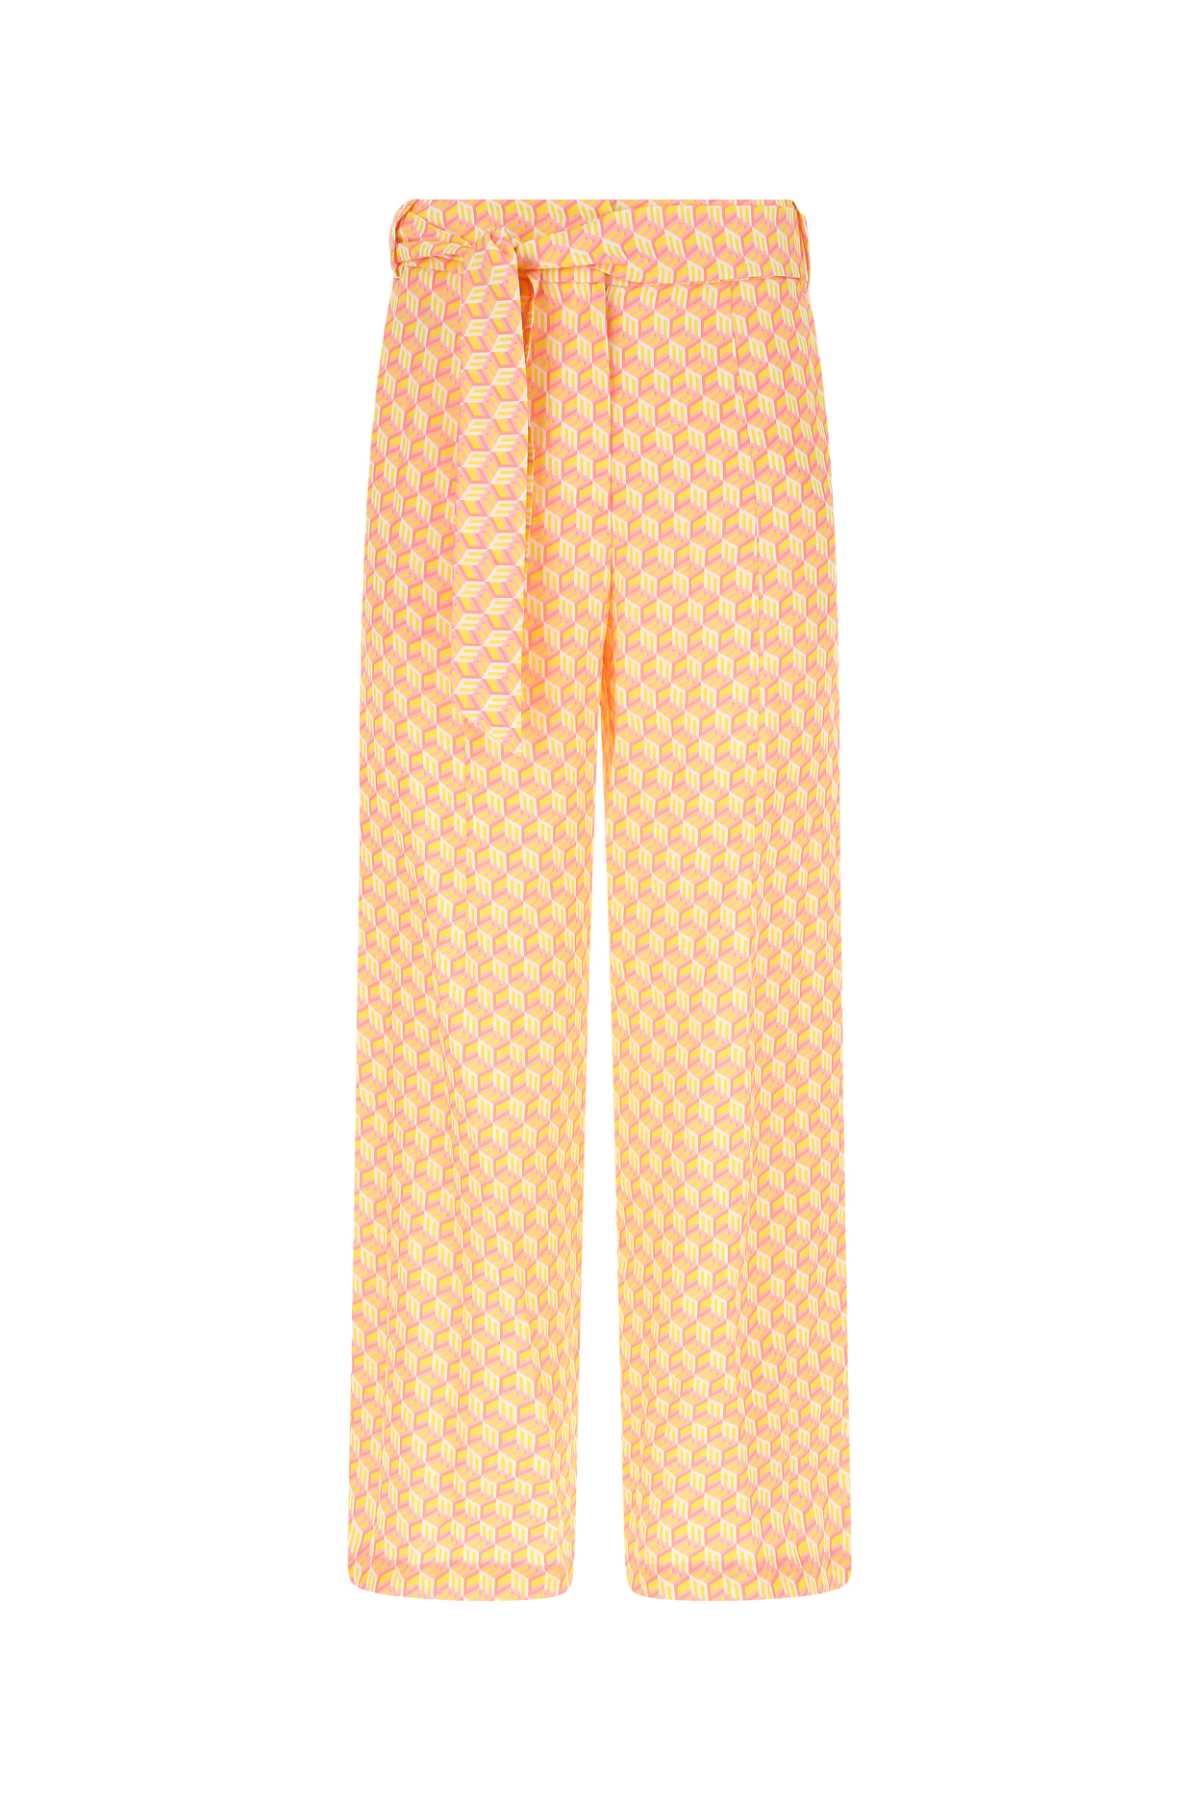 Embroidered Lyocell Pant